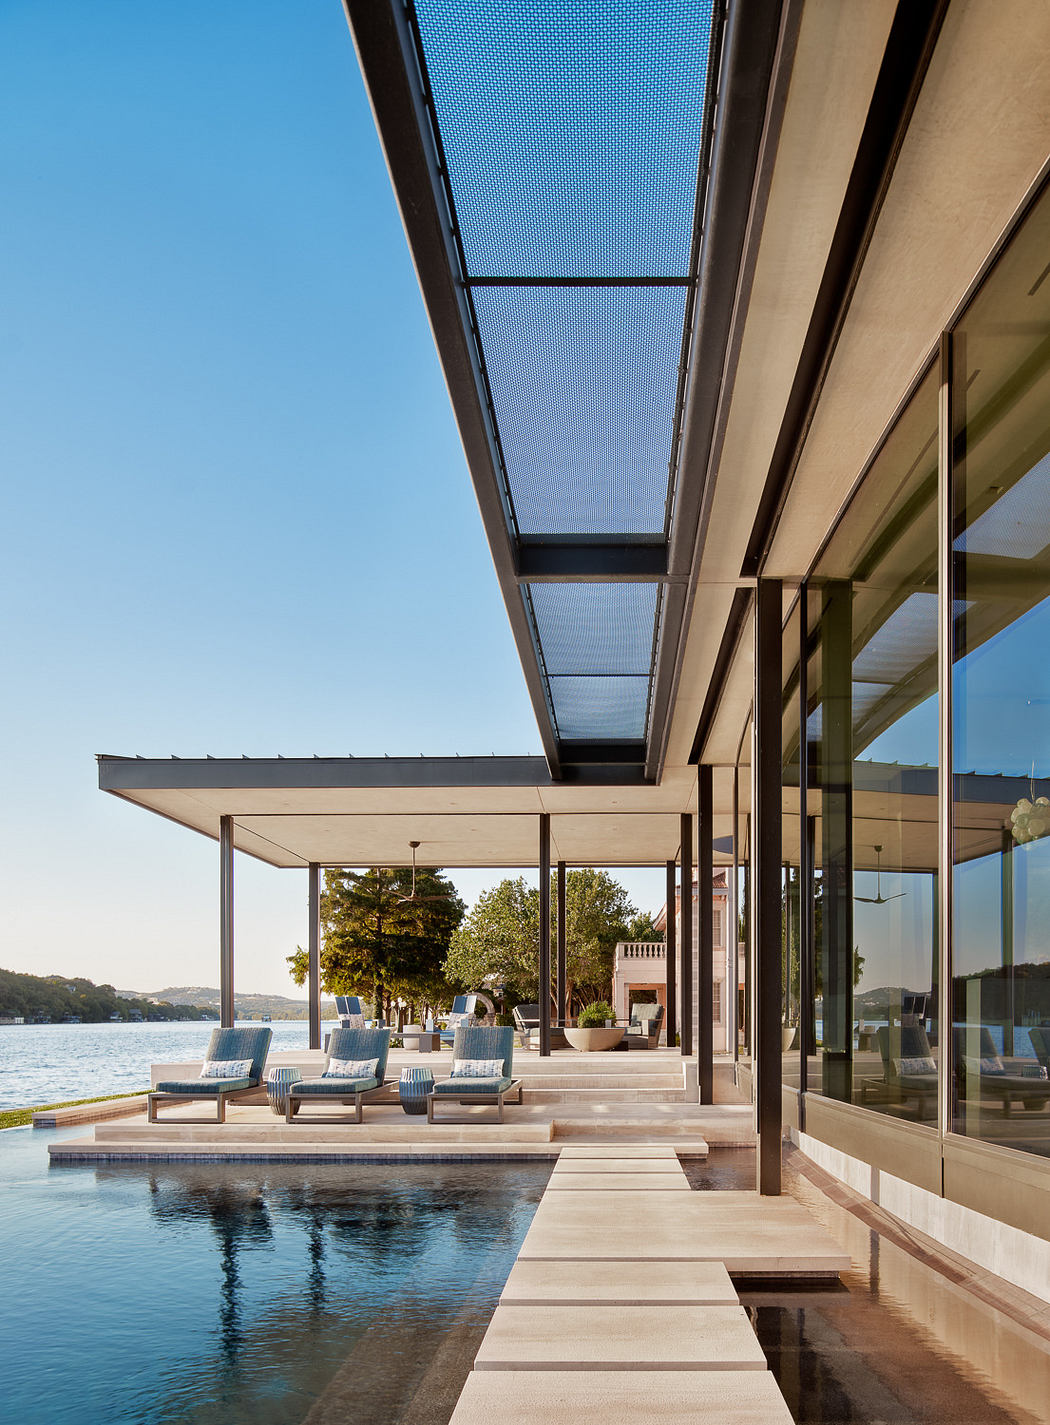 Modern waterfront home with glass walls and outdoor seating area under a pergola.